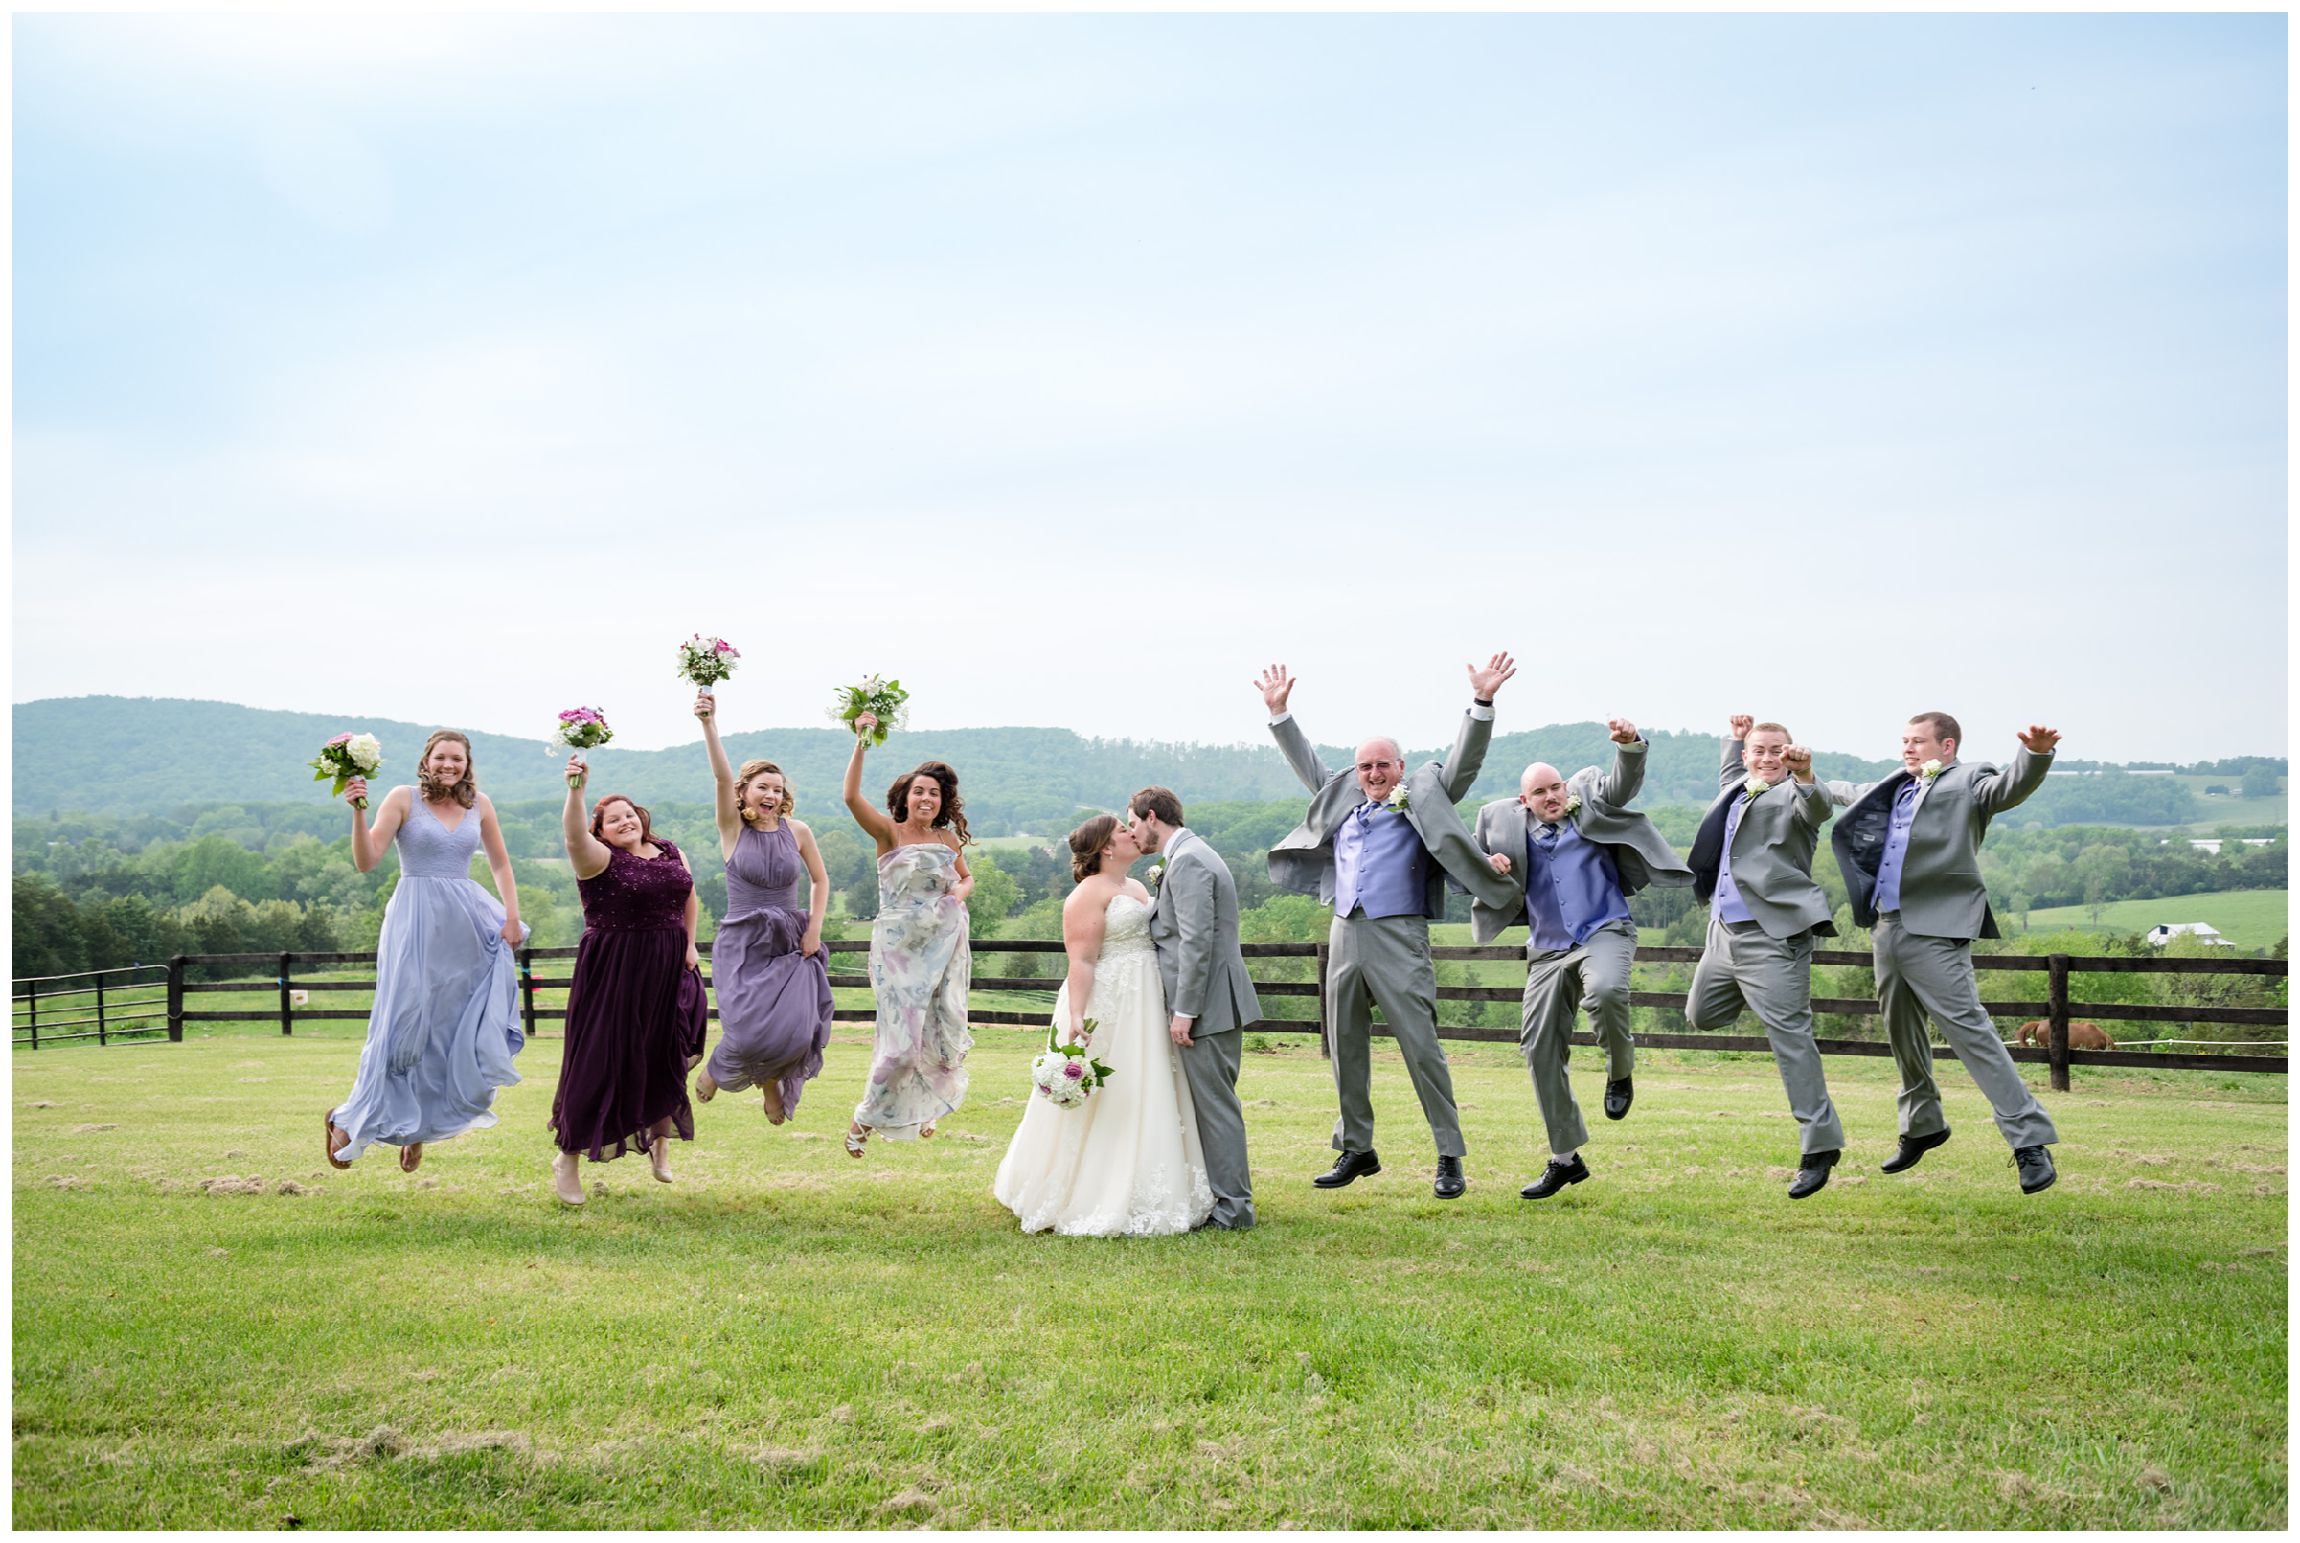 bridal party jumping against mountain backdrop after wedding at Wolftrap Farm in Virginia